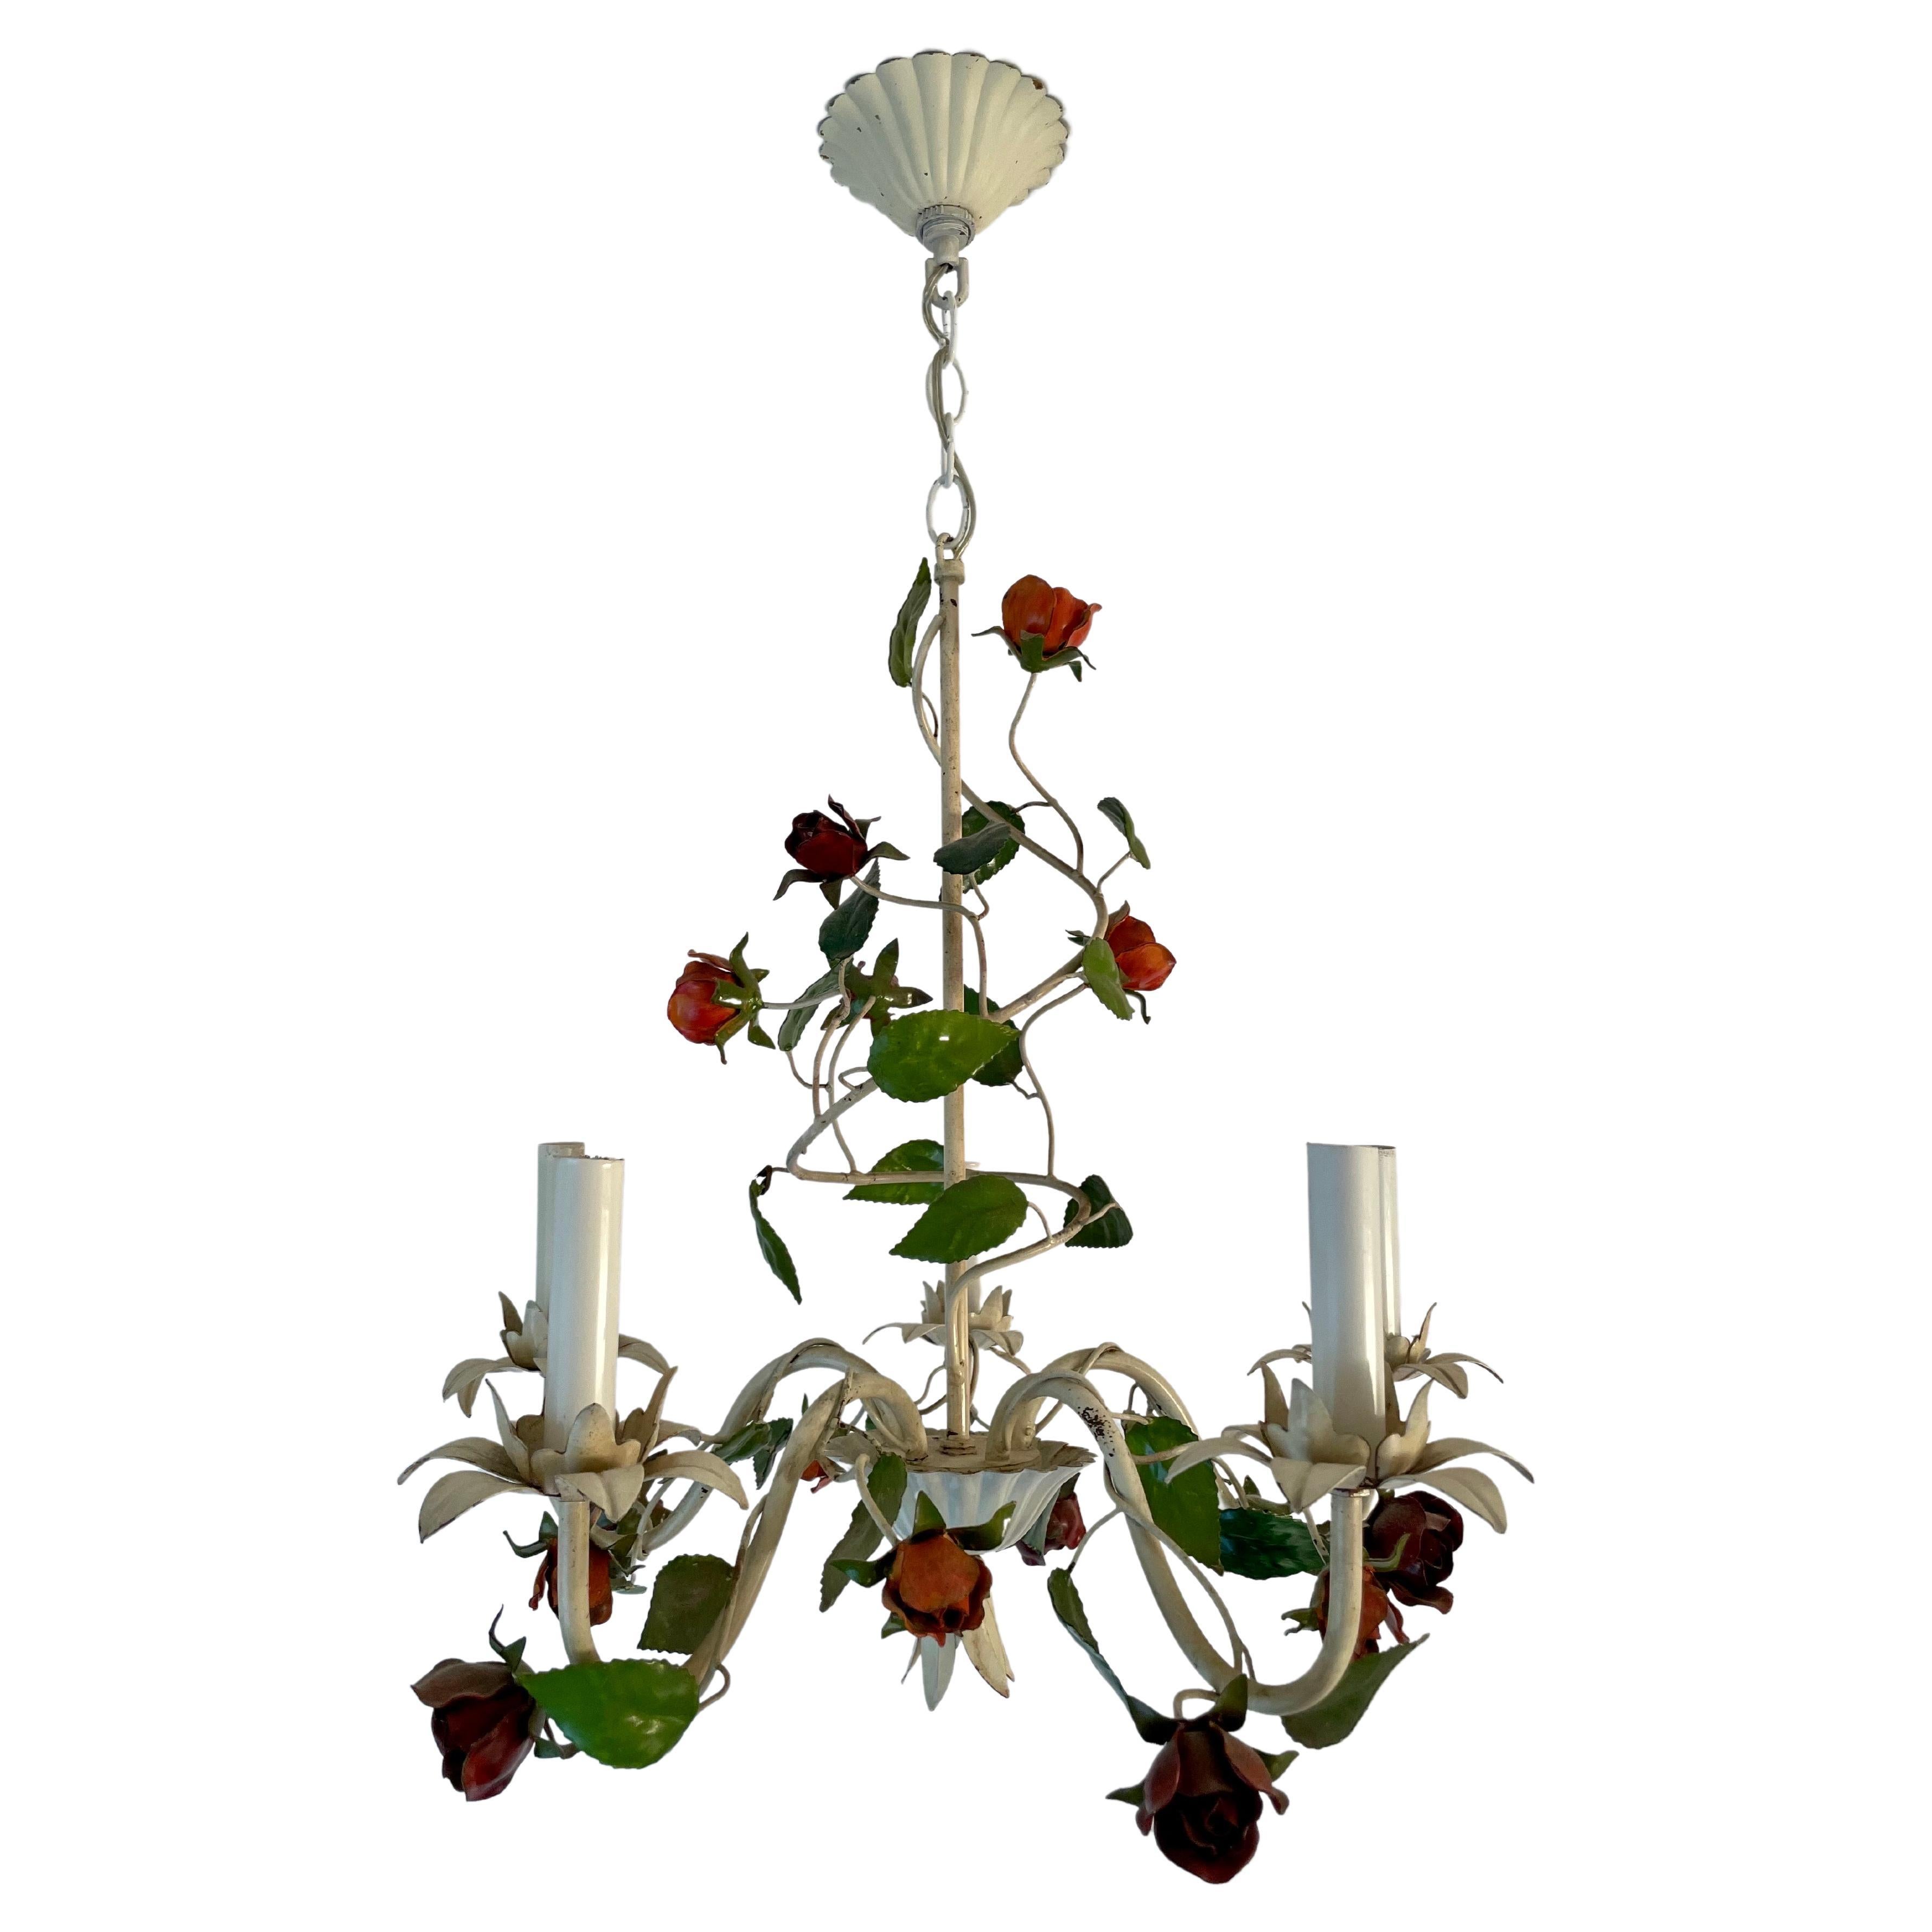 Vintage Italian Tole Floral Chandelier with Roses